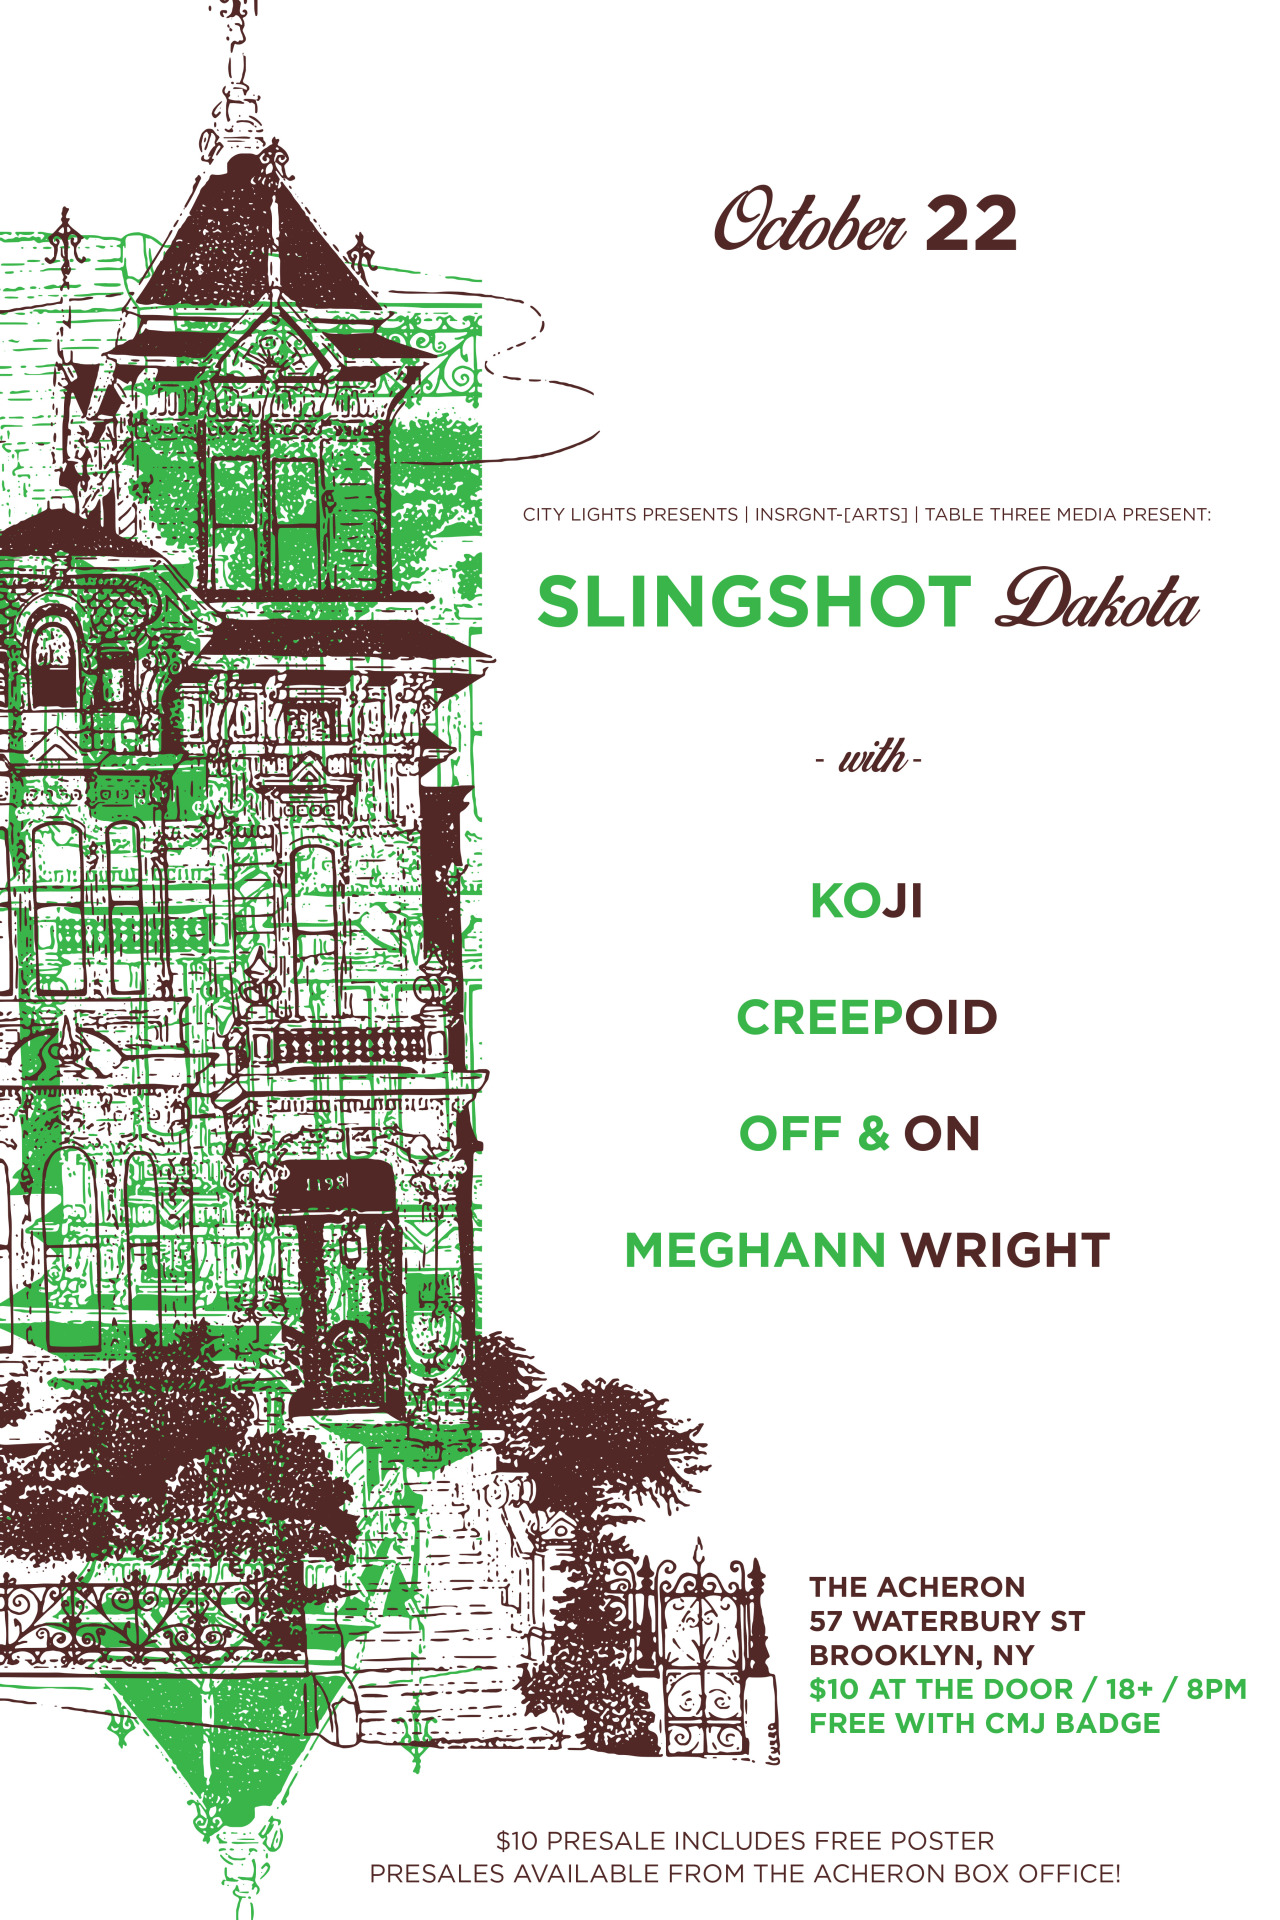 kojisaysaloha:
“ I’m performing in Brooklyn at the Acheron on Wednesday with my good friends, Slingshot Dakota. Joining us will be Creepoid, Off & On, Meghann Wright. It’s my first time playing Brooklyn in over a year and a half. Get tickets here.
”